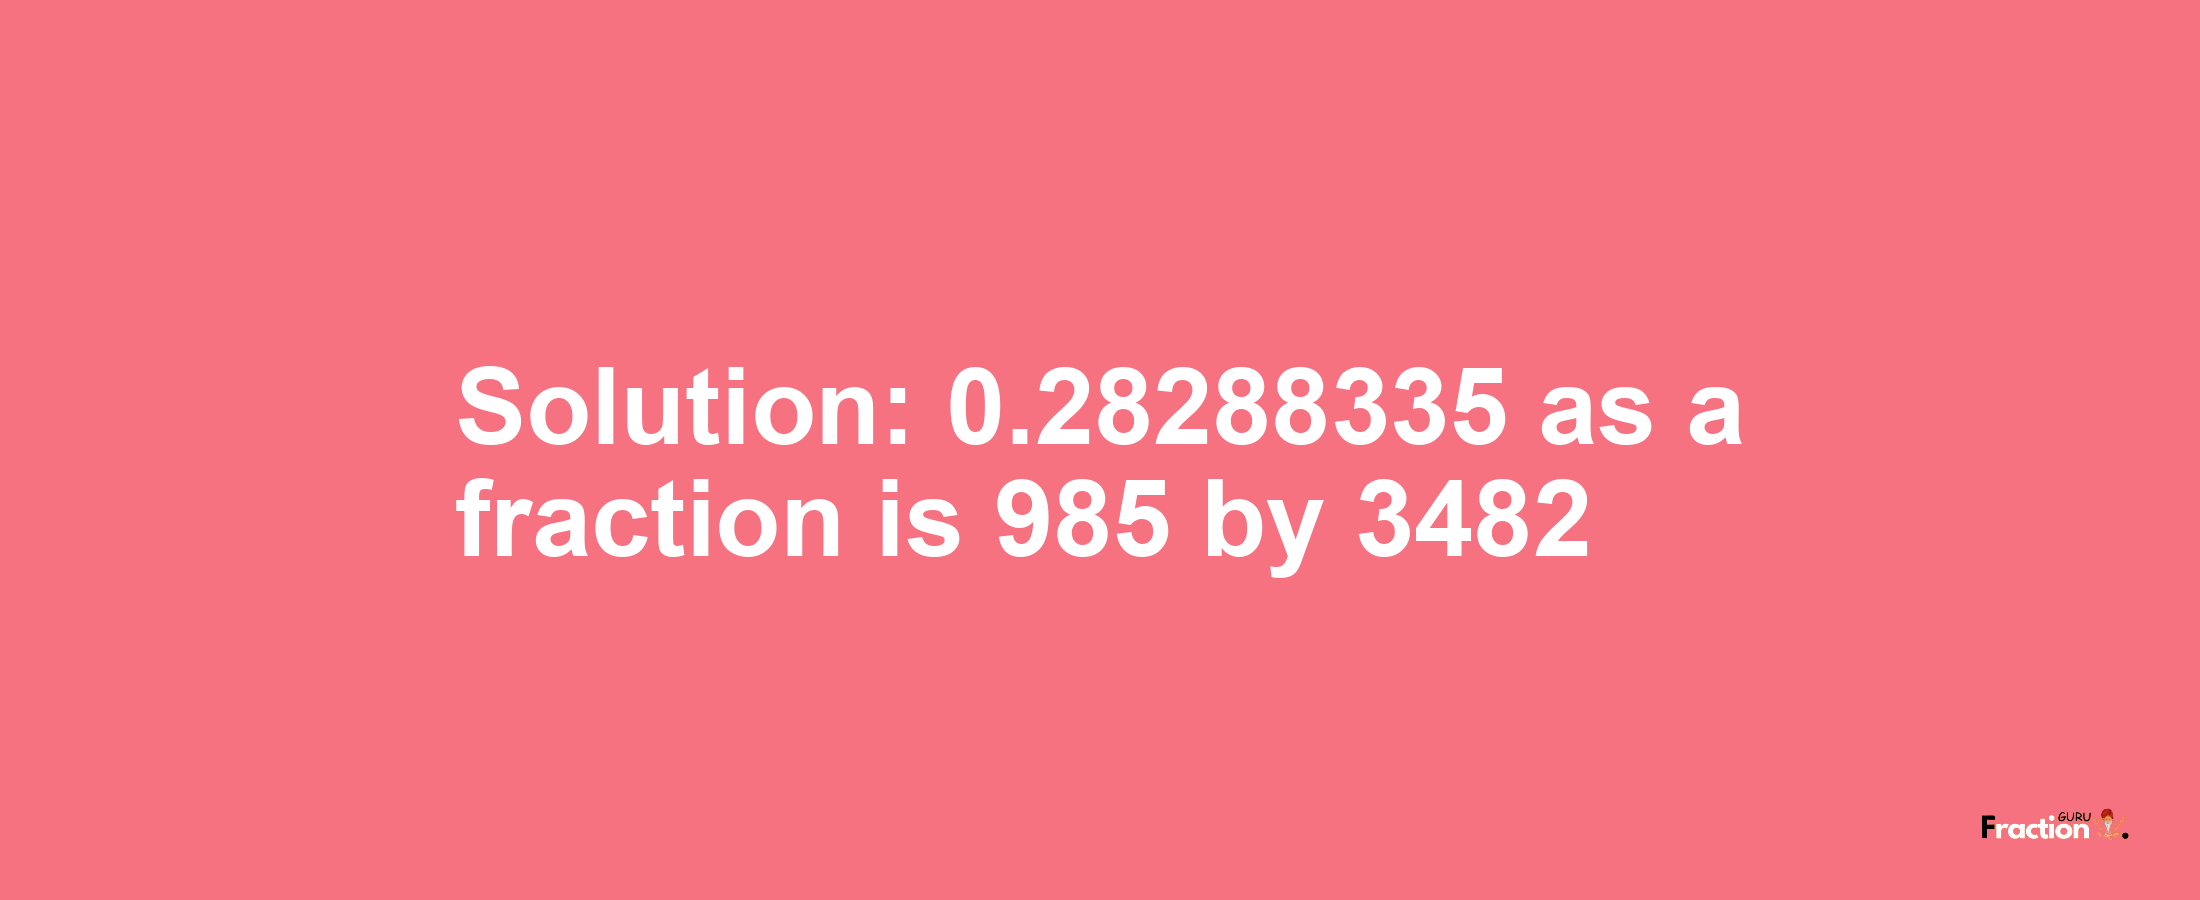 Solution:0.28288335 as a fraction is 985/3482